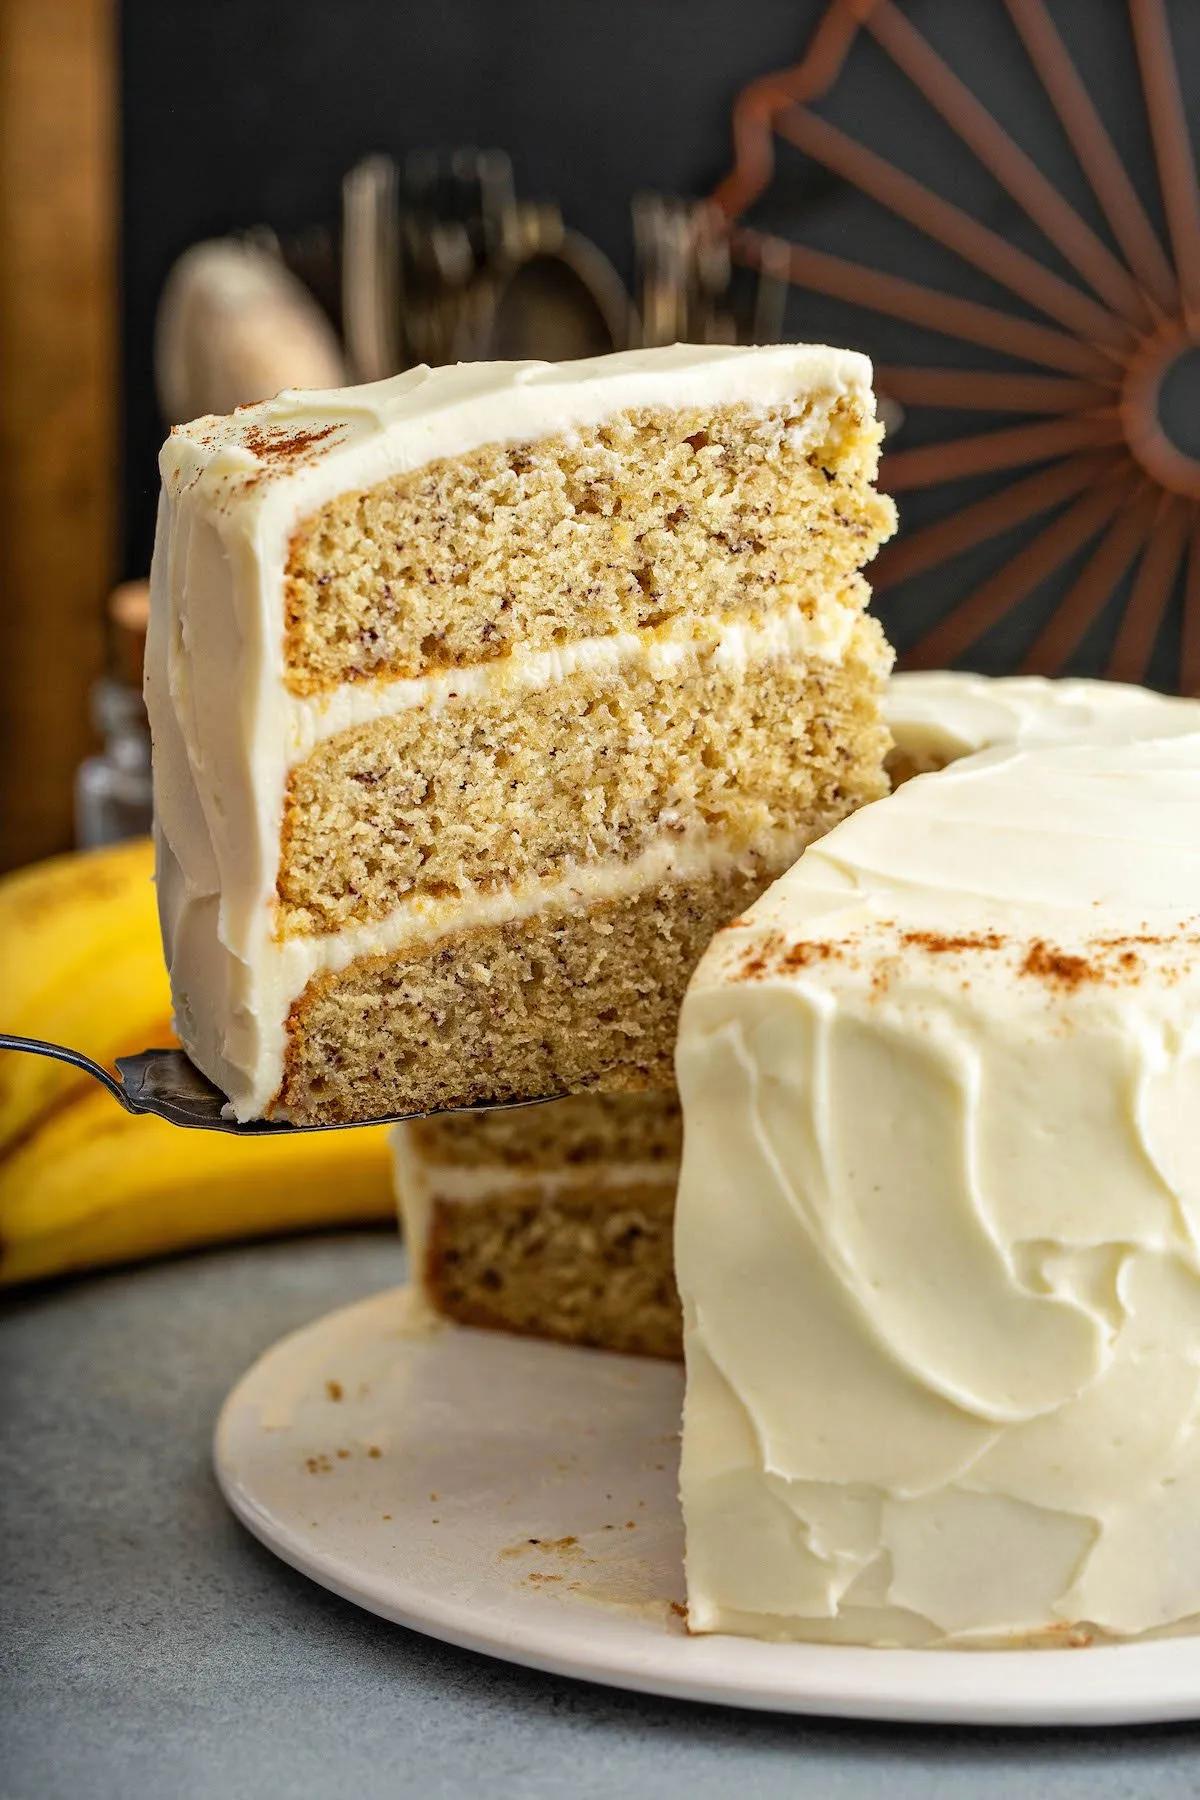 Best Banana Cake Recipe with Cinnamon Frosting | The Novice Chef